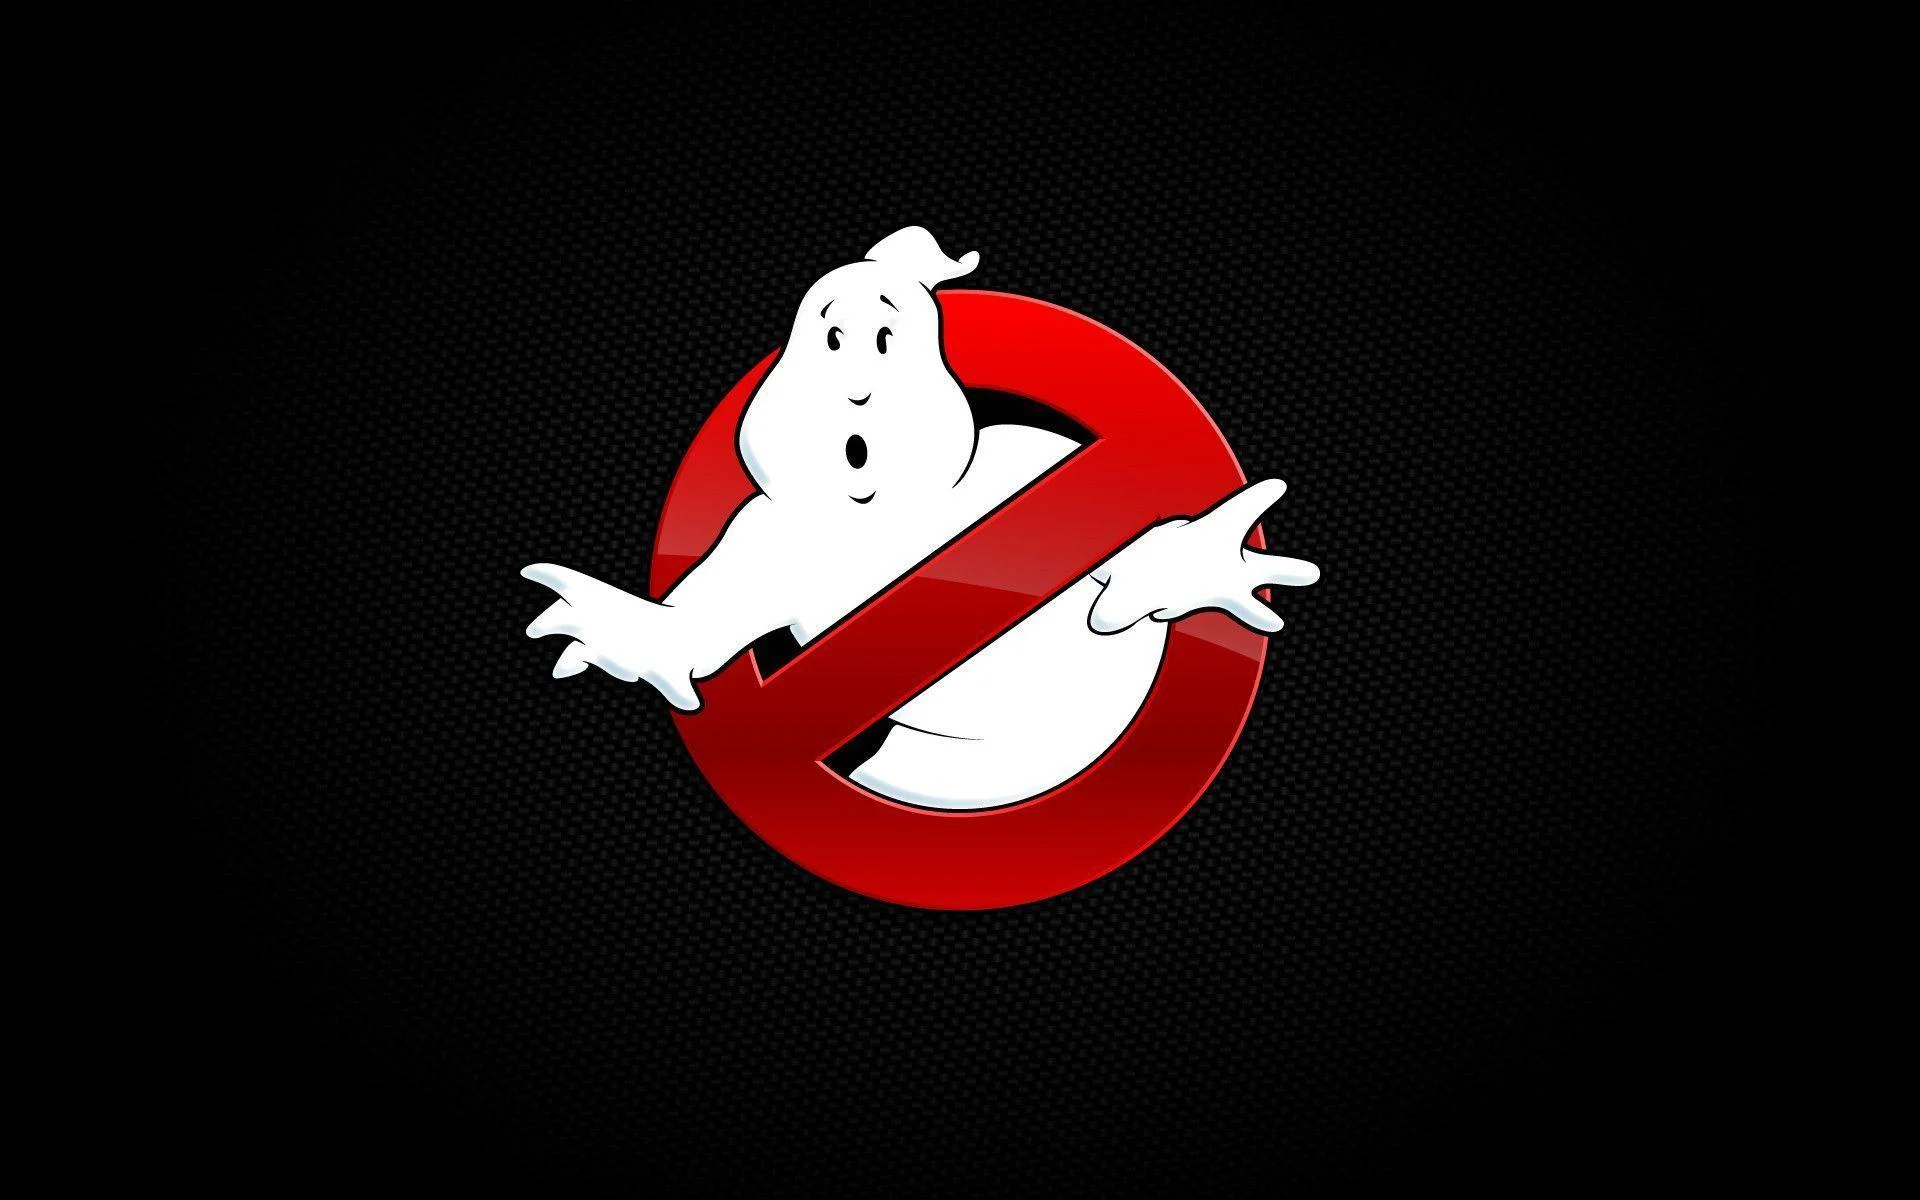 Ghostbusters: A comedy about three guys who study the paranormal and save New York City from an evil spirit intending "to bring about the end of the world". 1920x1200 HD Wallpaper.